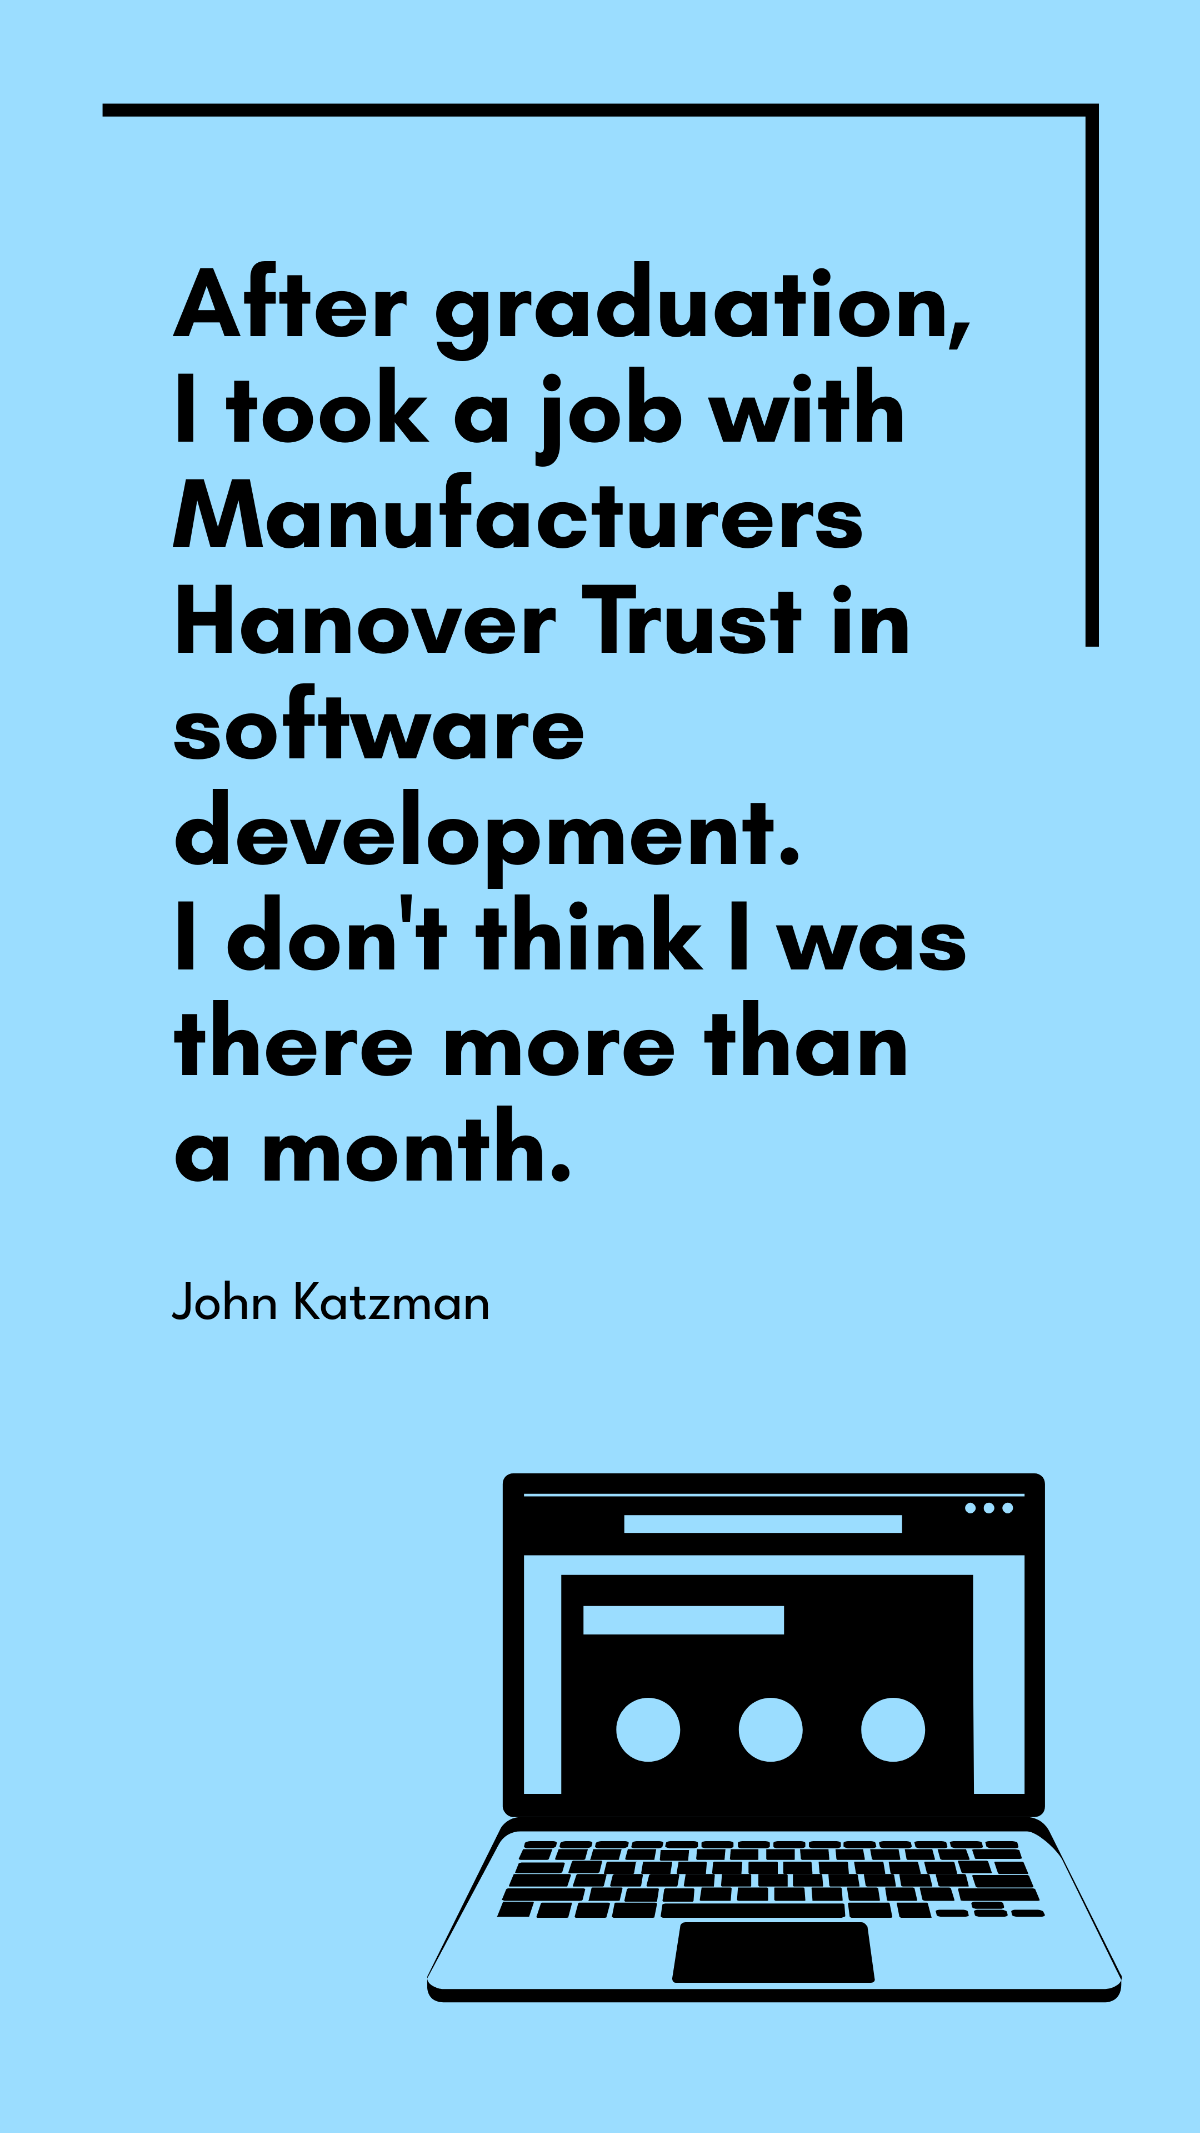 John Katzman - After graduation, I took a job with Manufacturers Hanover Trust in software development. I don't think I was there more than a month. Template